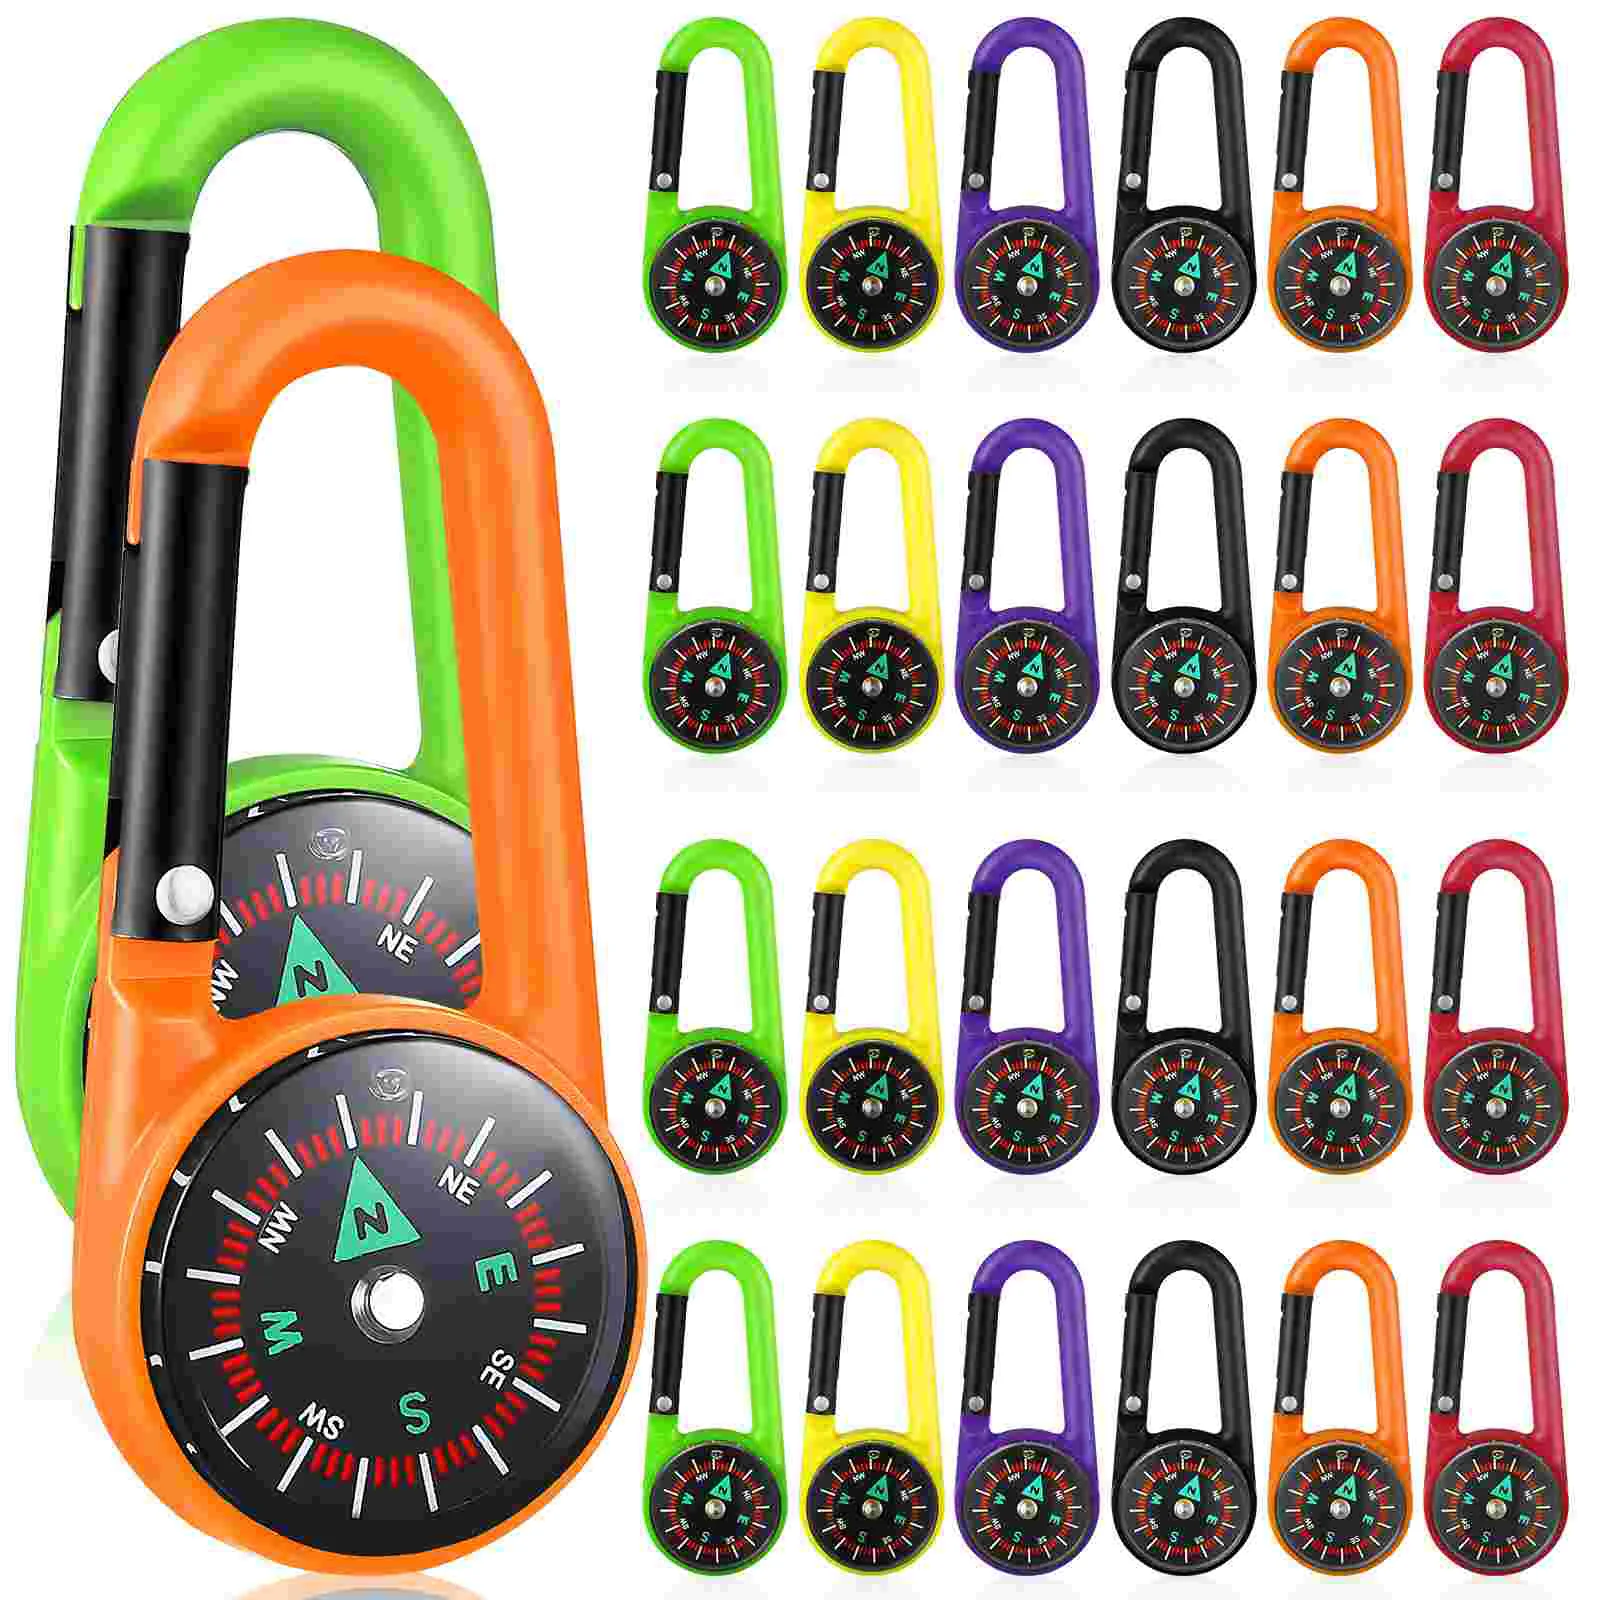 

24 Pcs Climbing Compass Carabiners Outdoor Self Locking Carabiner Keychains for Traveling Hiking Tourism